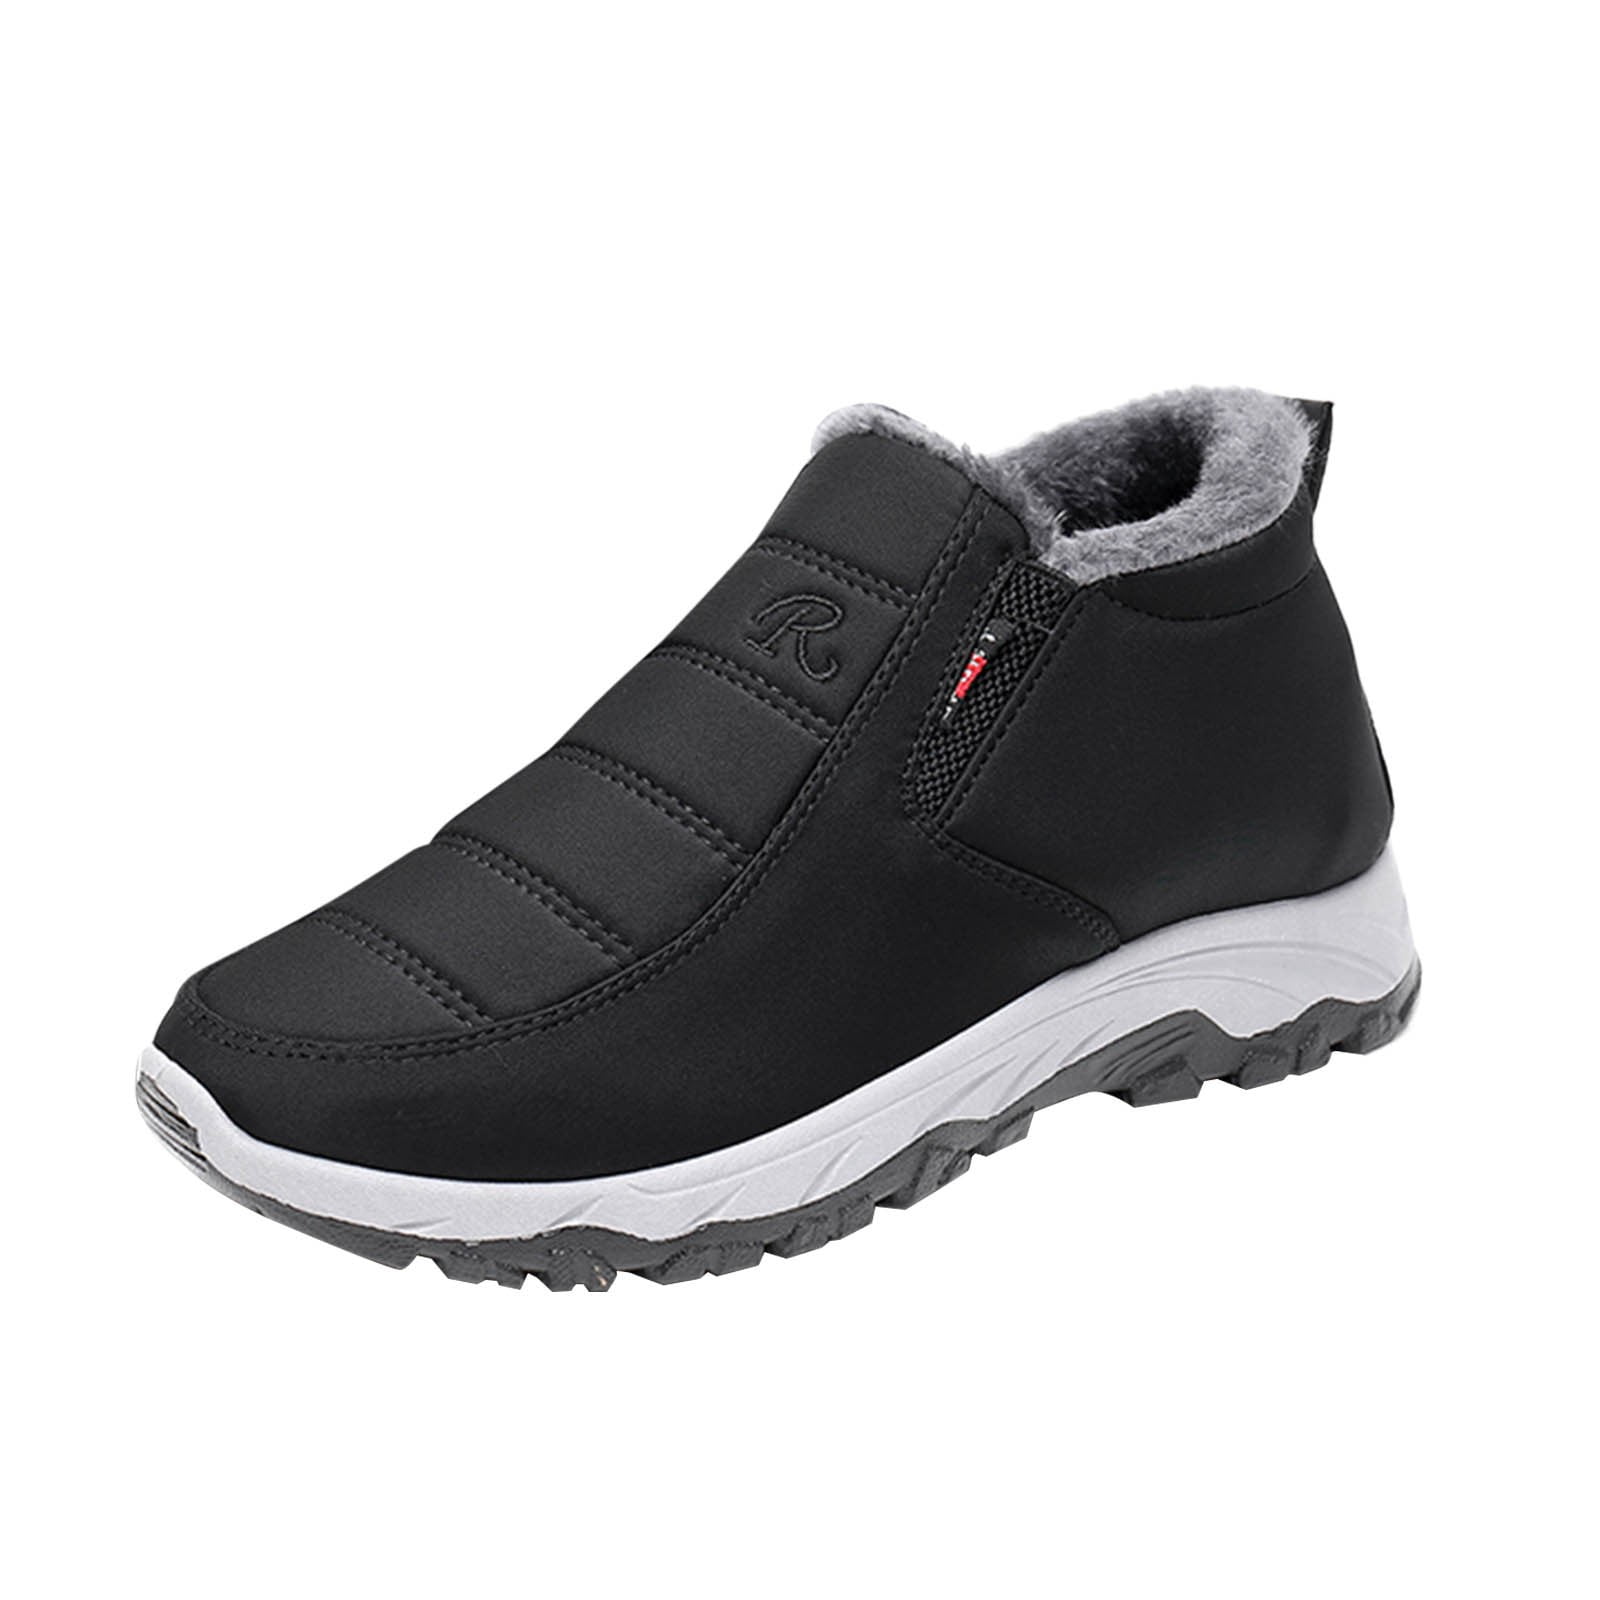 HSMQHJWE Mens Snow Boots Size 15 Removable Liner Work Winter Shoes Mens ...